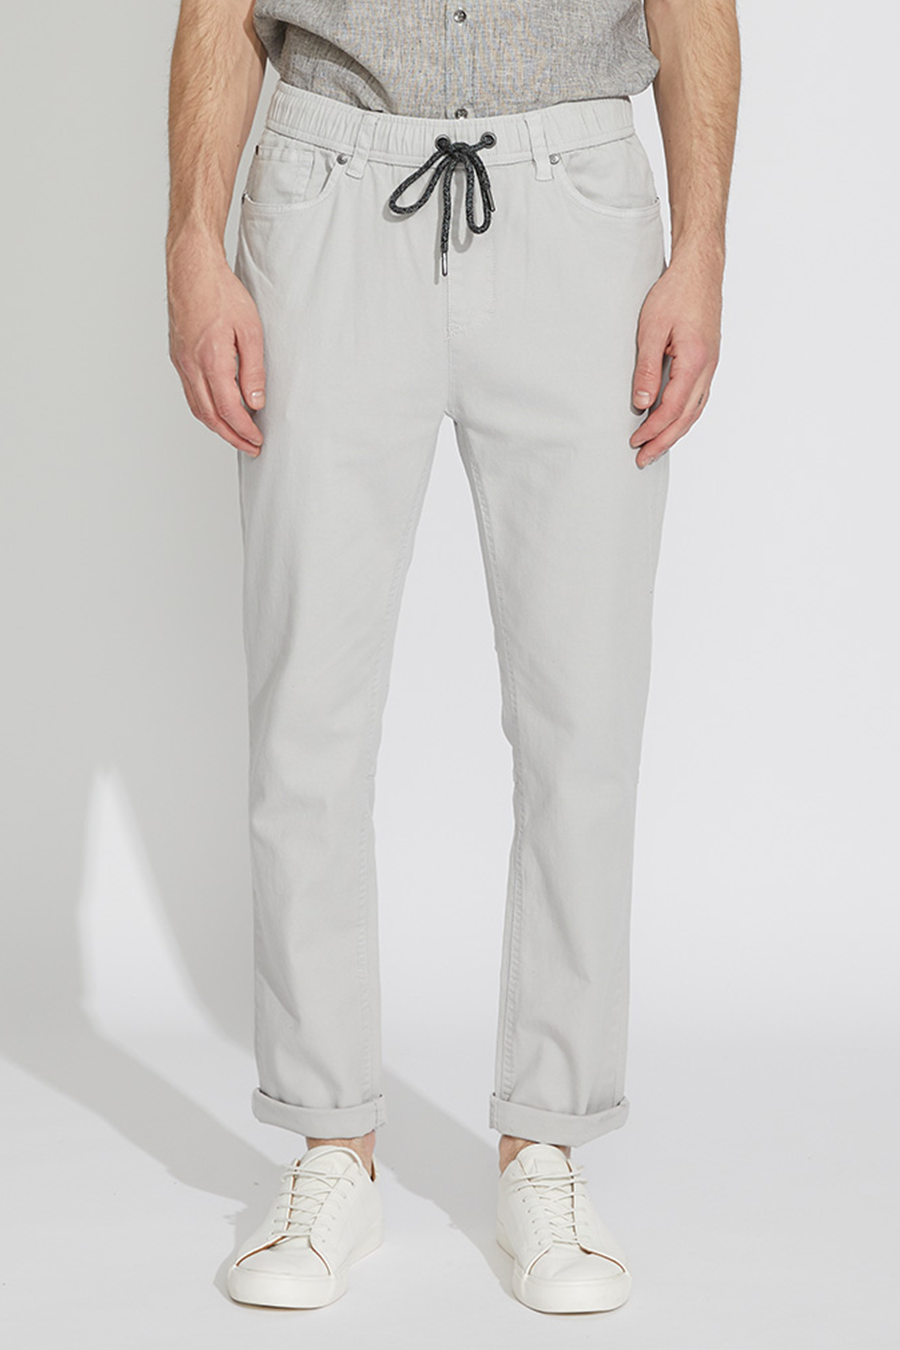 Edwin Slouch Pant | Light Gray - Main Image Number 1 of 1